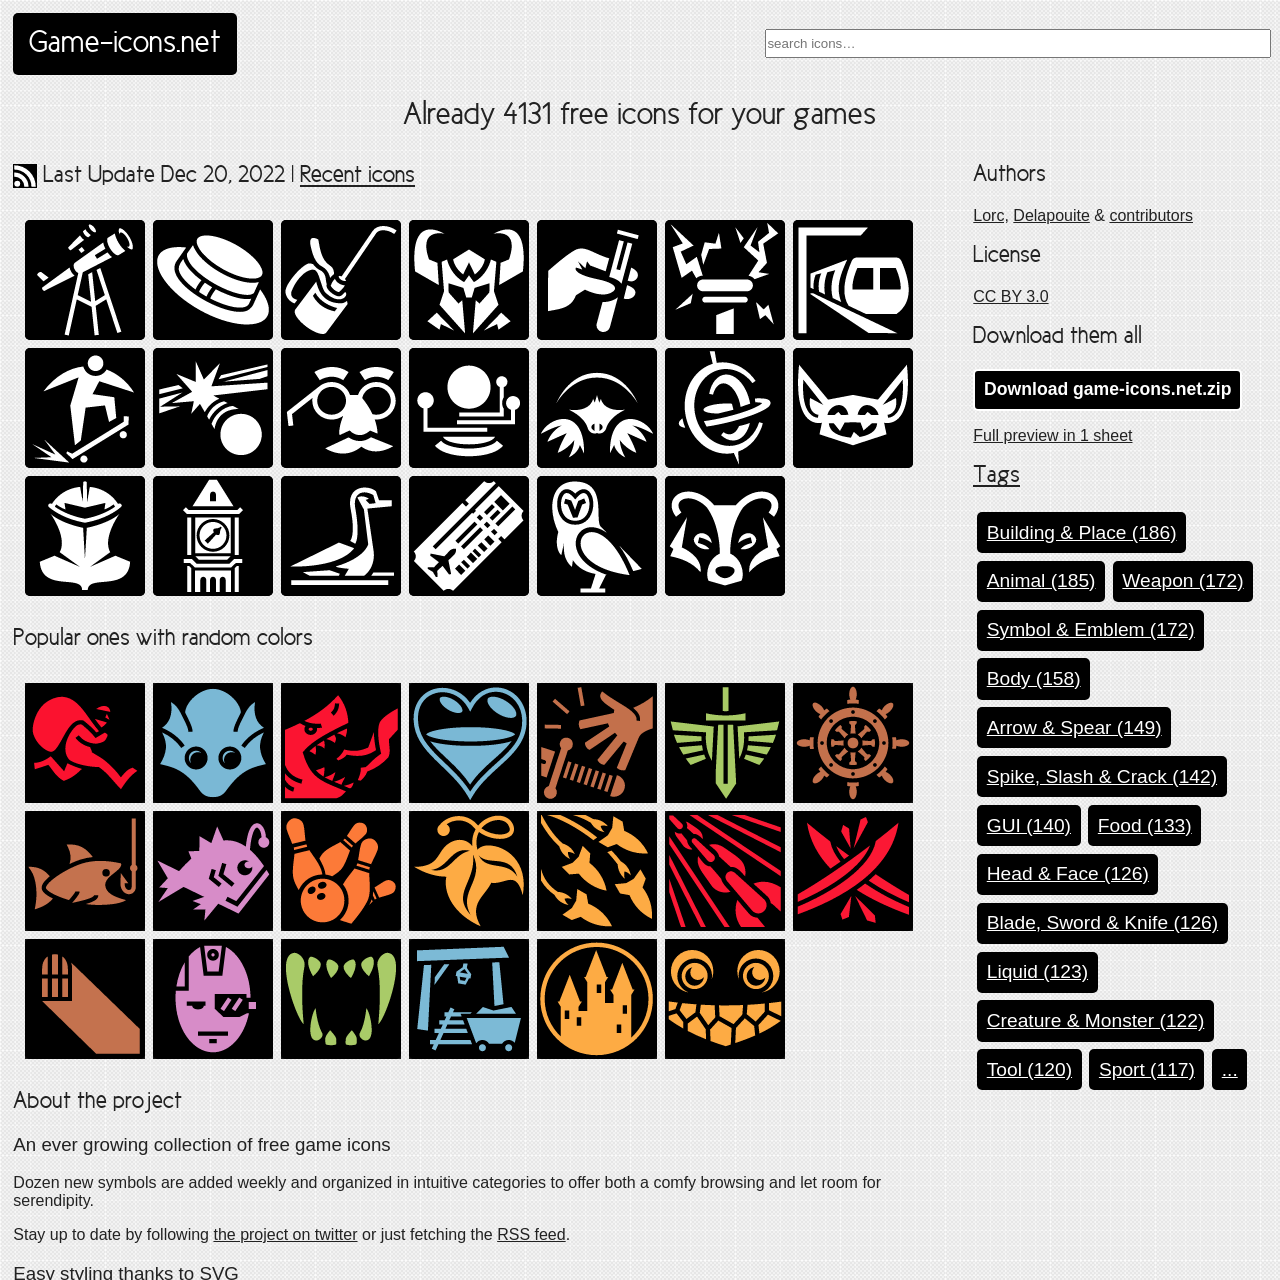 Screenshot of Game Icons website